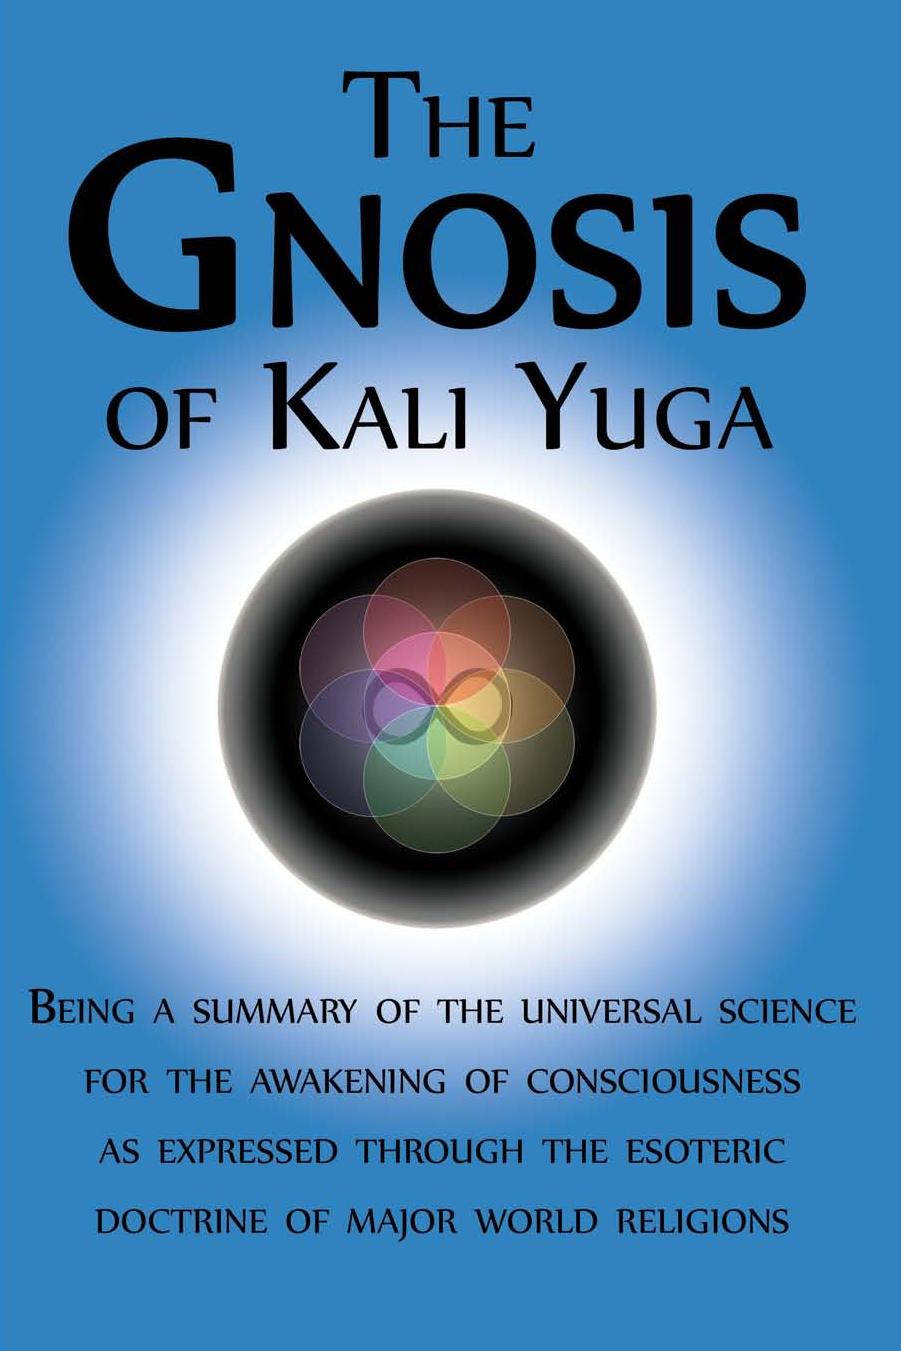 The Gnosis of Kali Yuga - BEing - A Summary of the Universal Science for the Awakening of Consciousness as Expressed Through the Esoteric Doctrine of Major World Religions